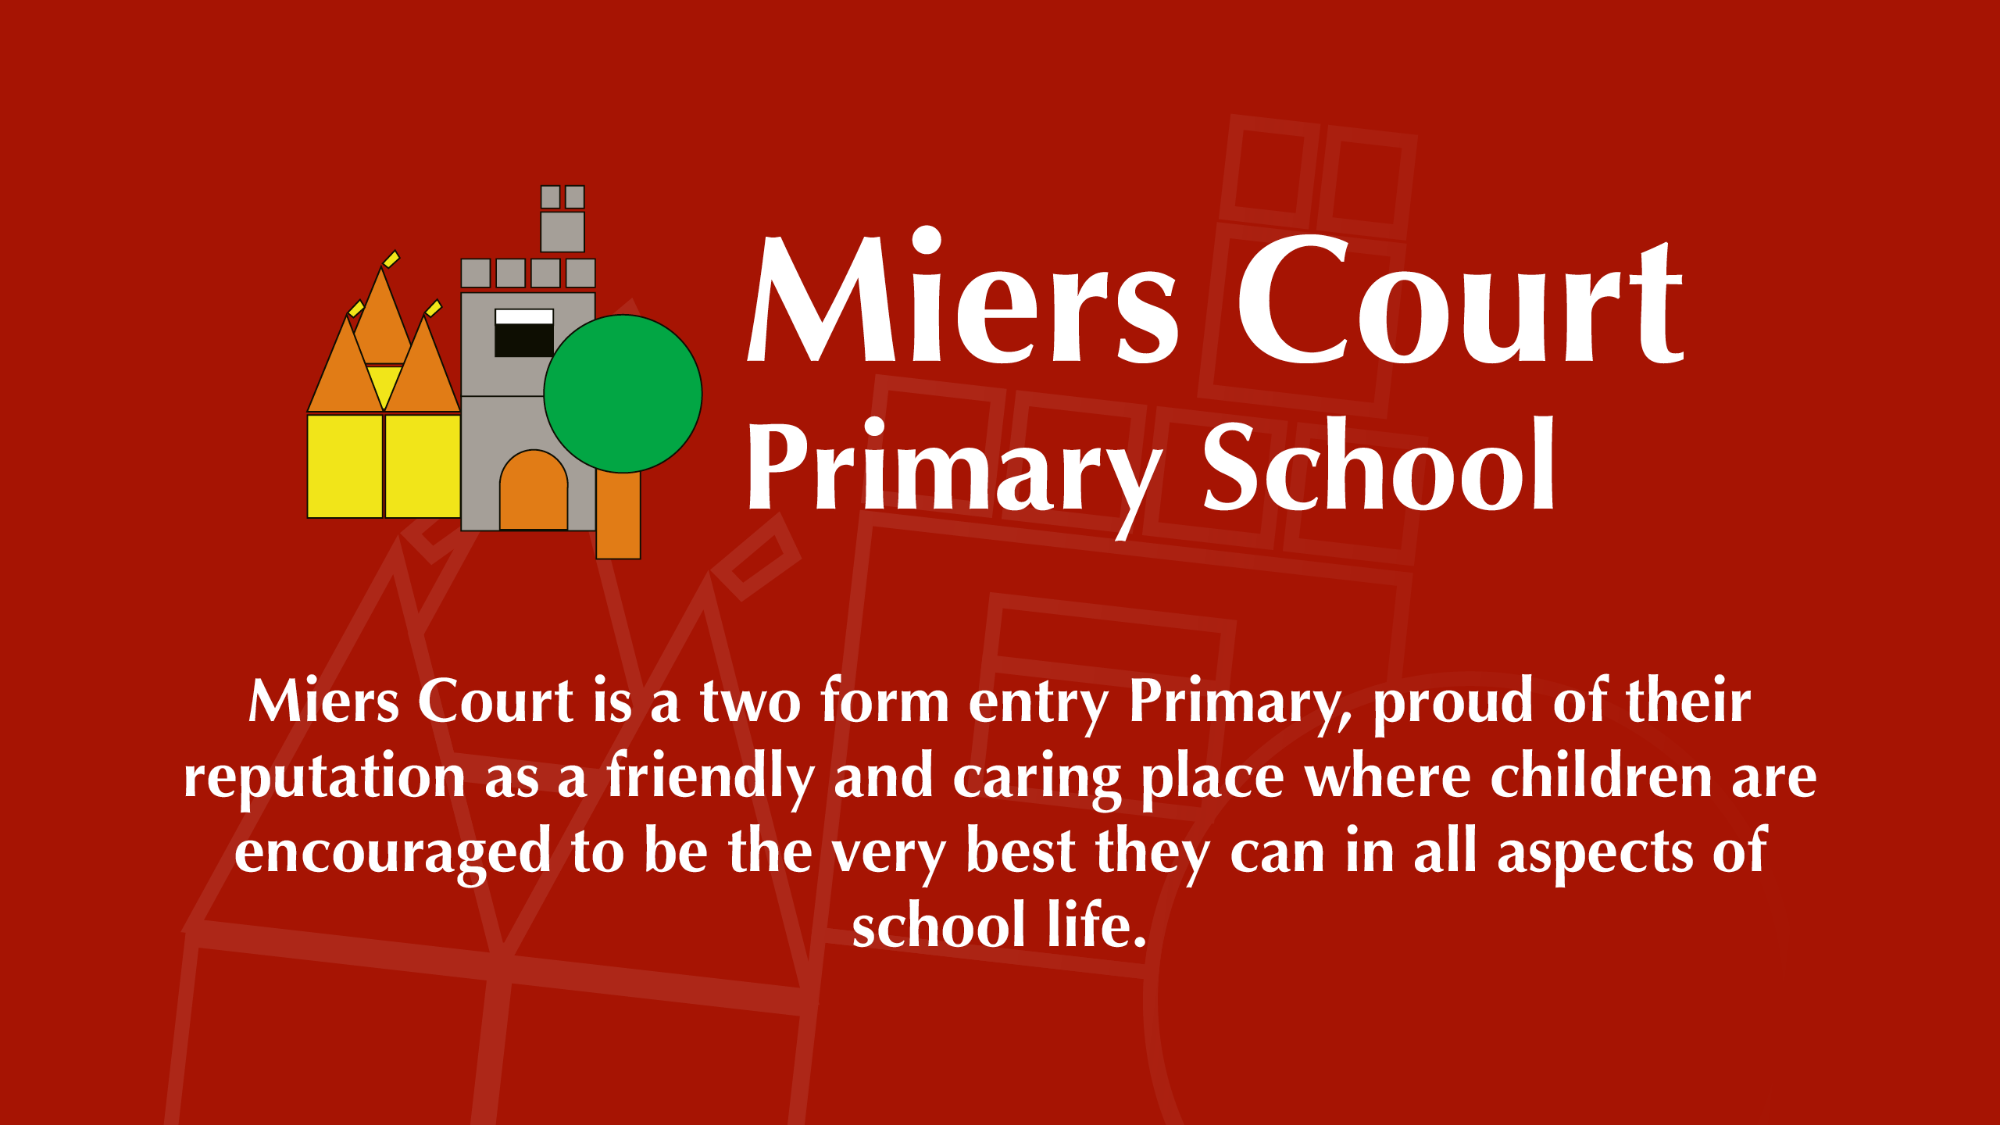 Miers Court Primary School logo on a red background.